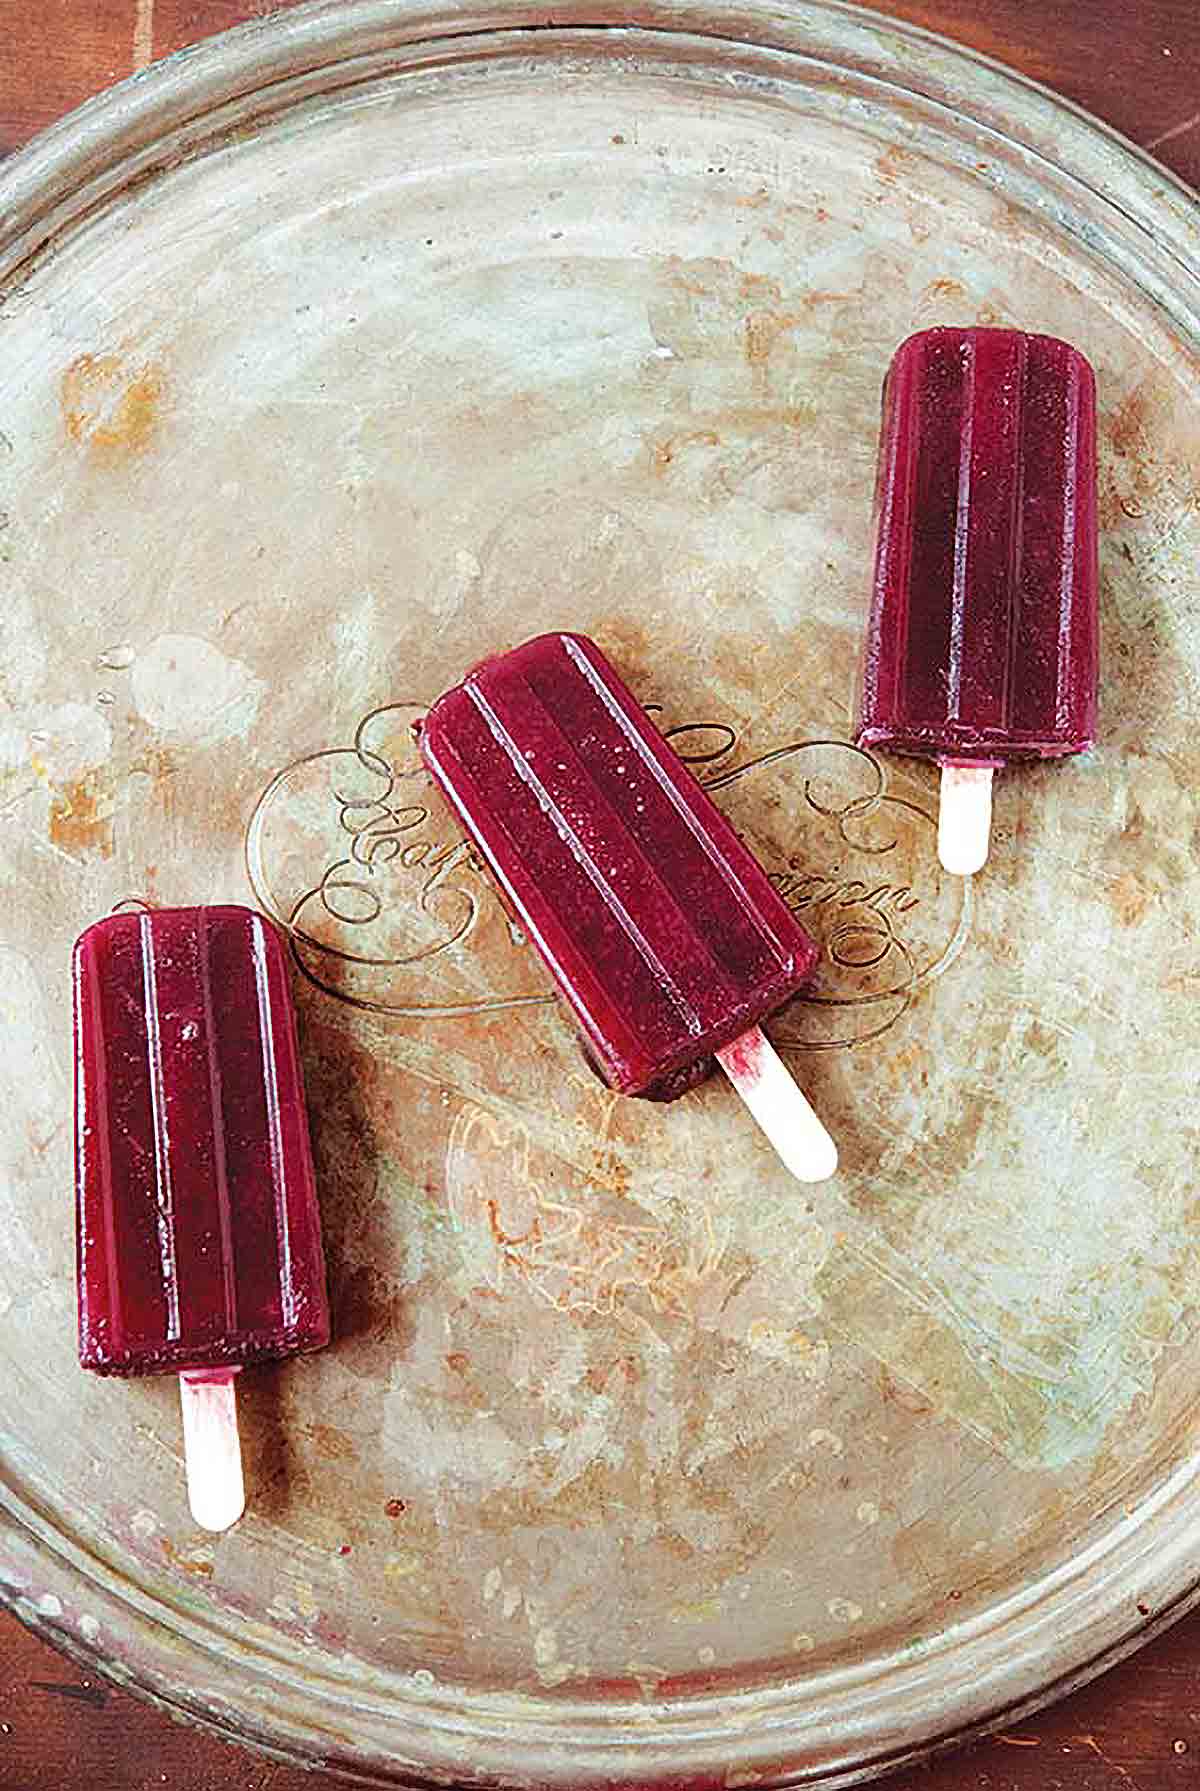 Three red wine popsicles on a silver tray.